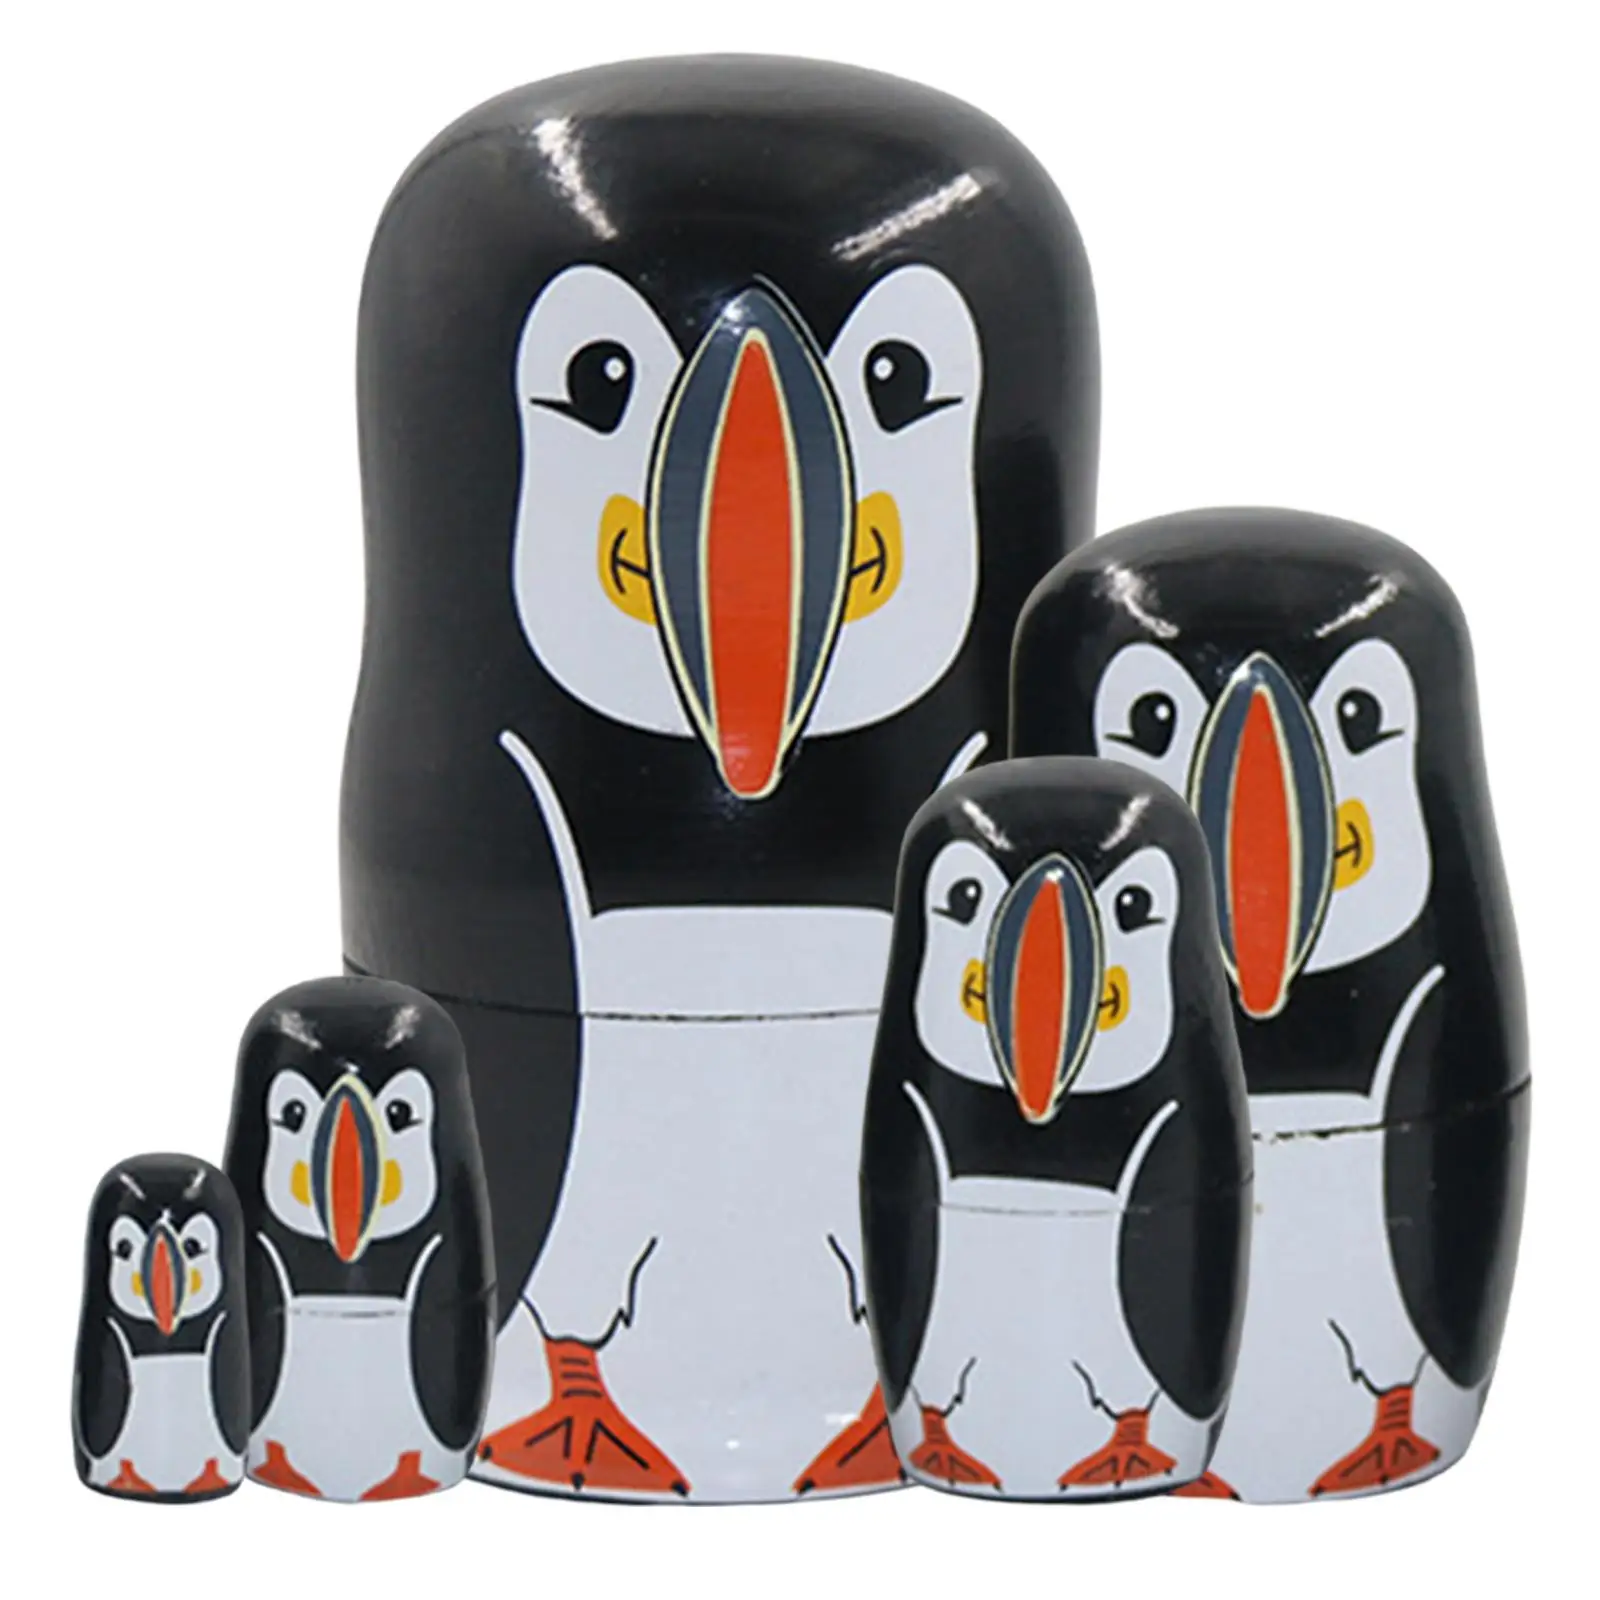 Cute Wooden Penguin Pattern Nesting Dolls Kits 5 Pieces Child Room Decoration Paintings Manually Done Colorful Popular Handmade